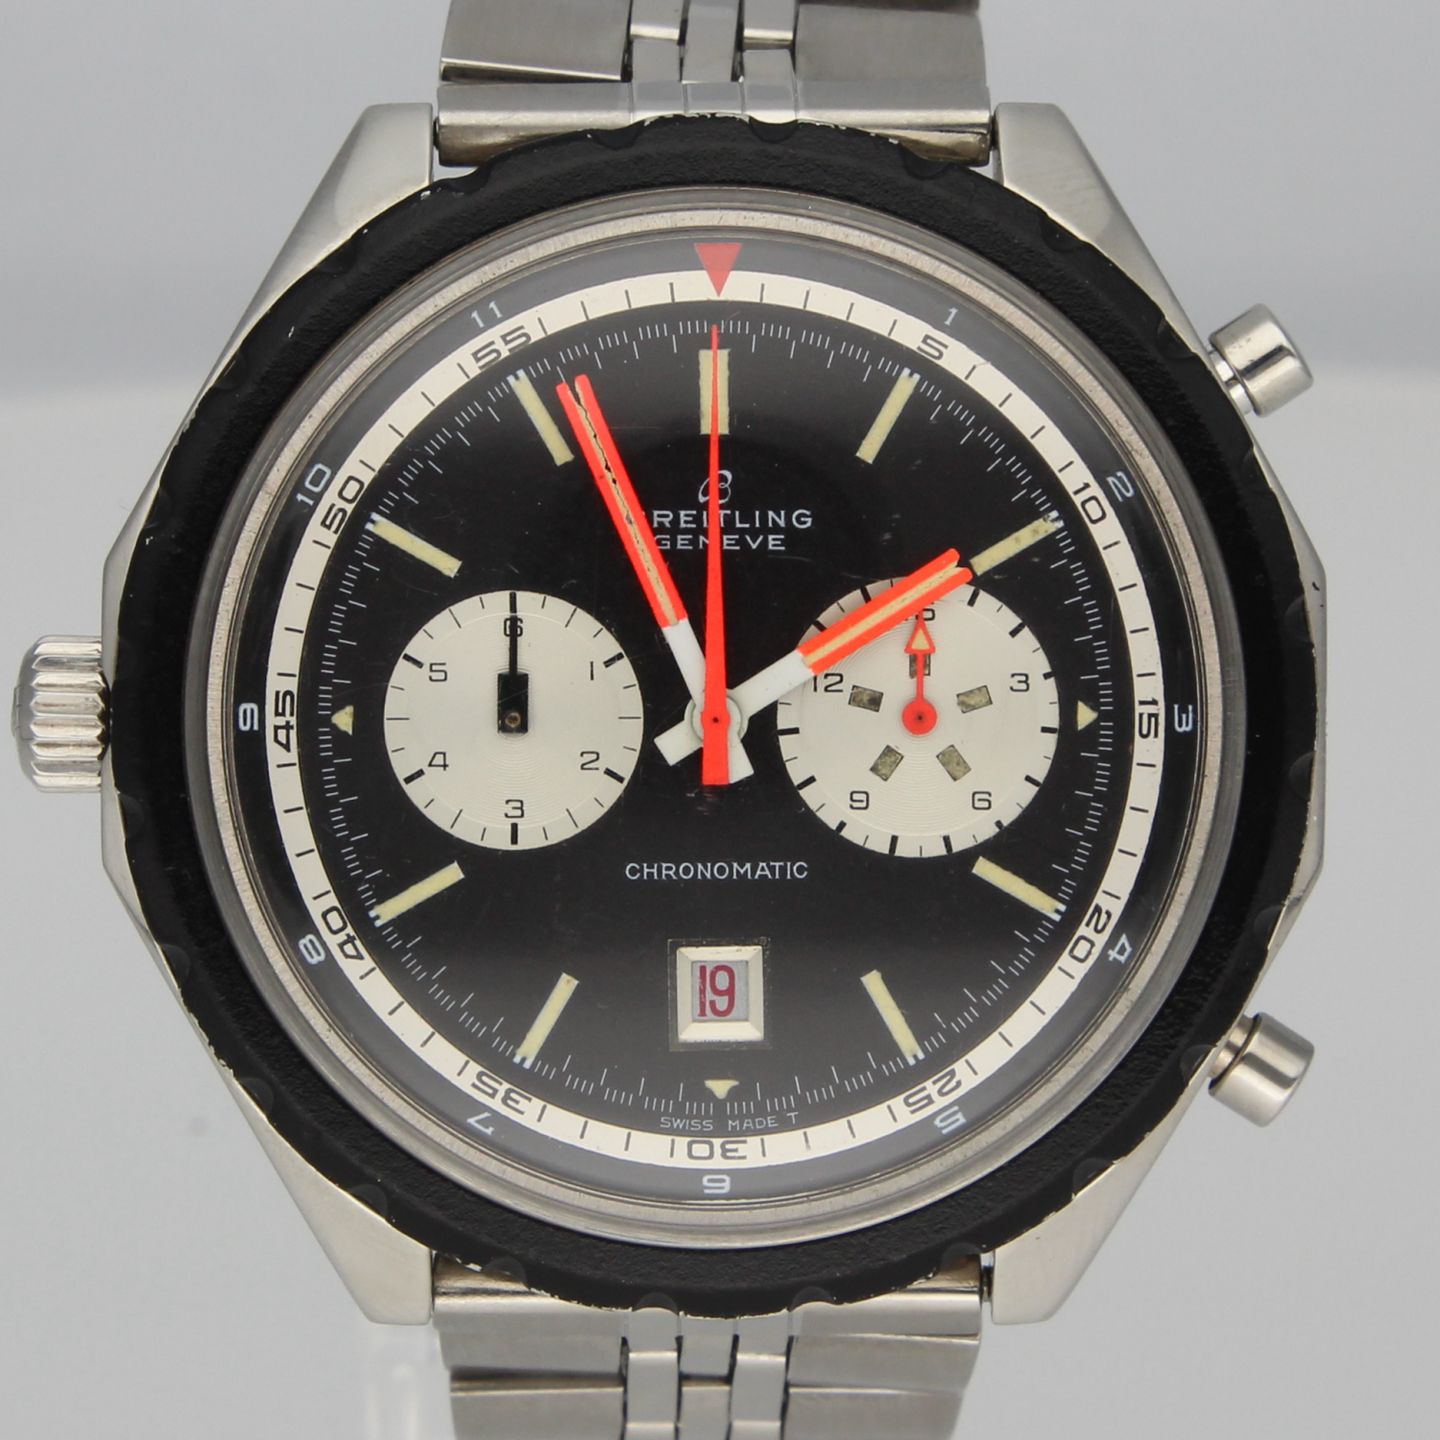 Breitling Chrono-Matic 11525/67 (1968) - Black dial 48 mm Steel case (1/8)